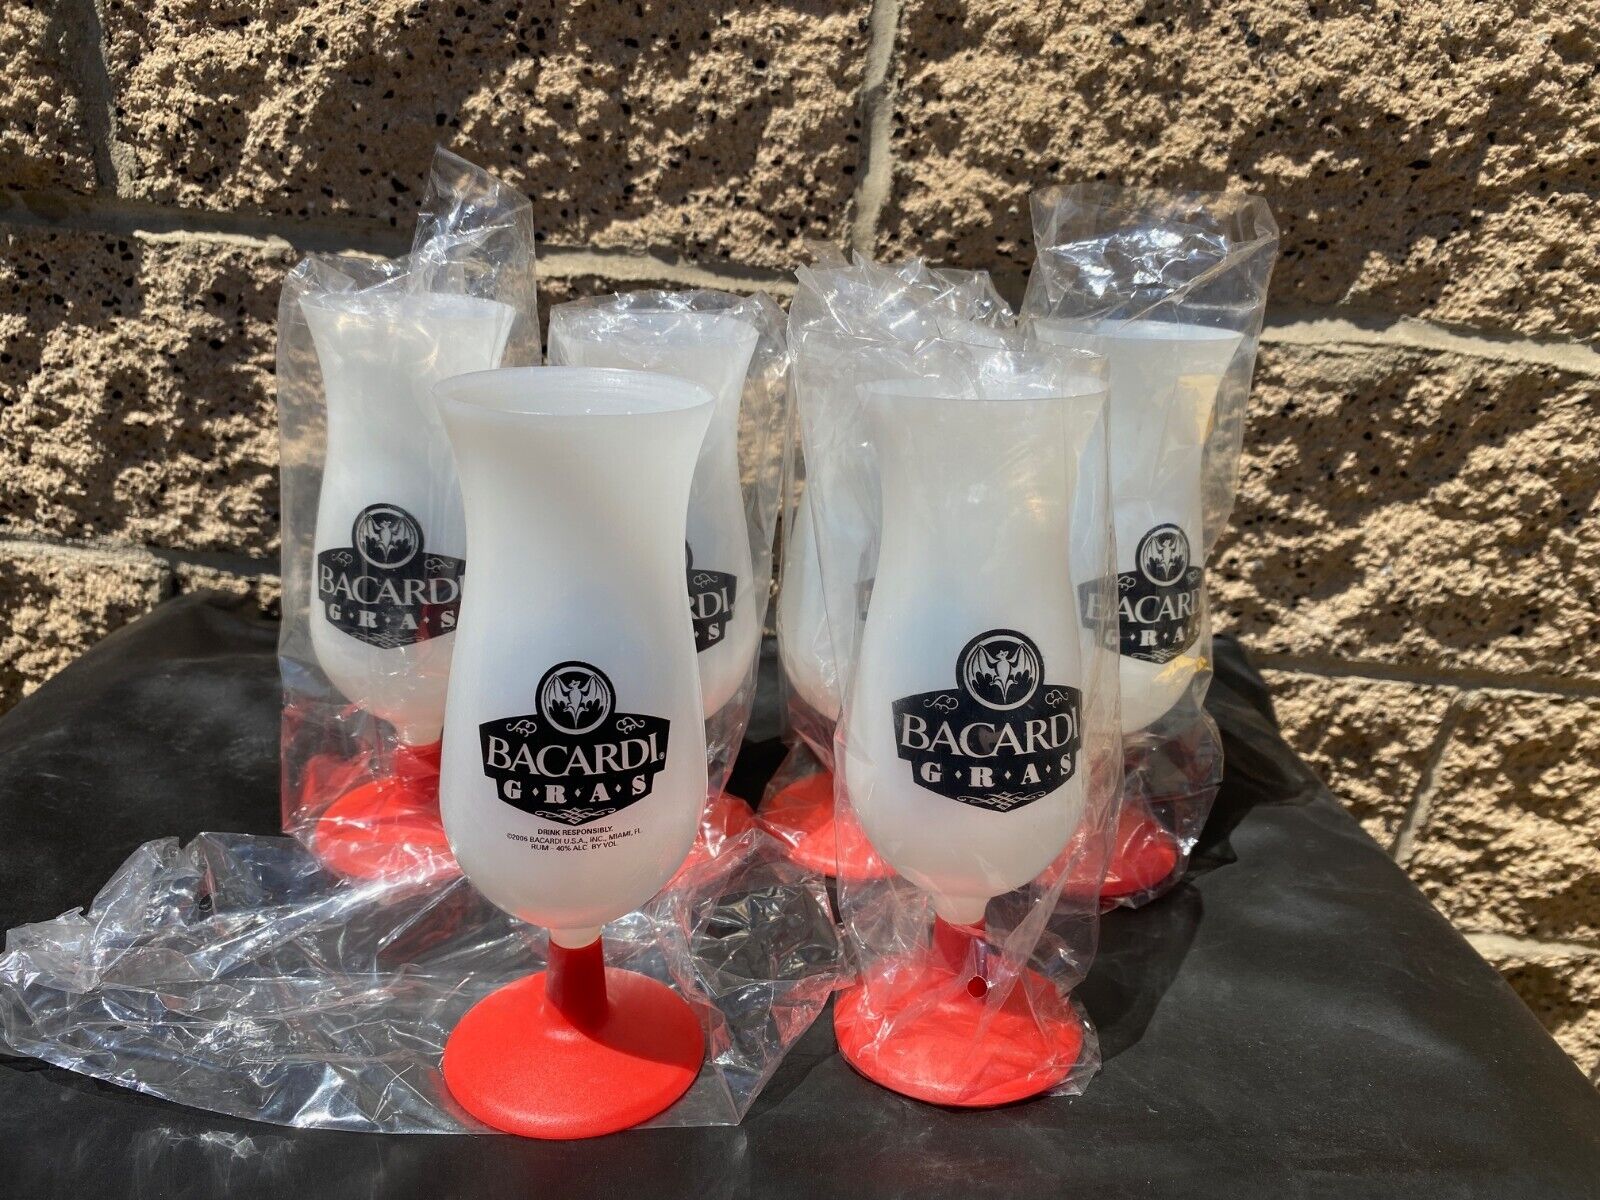 Lot of 6-Bacardi Gras Plastic wine glasses 2006 Drinkware Collectible-NEW